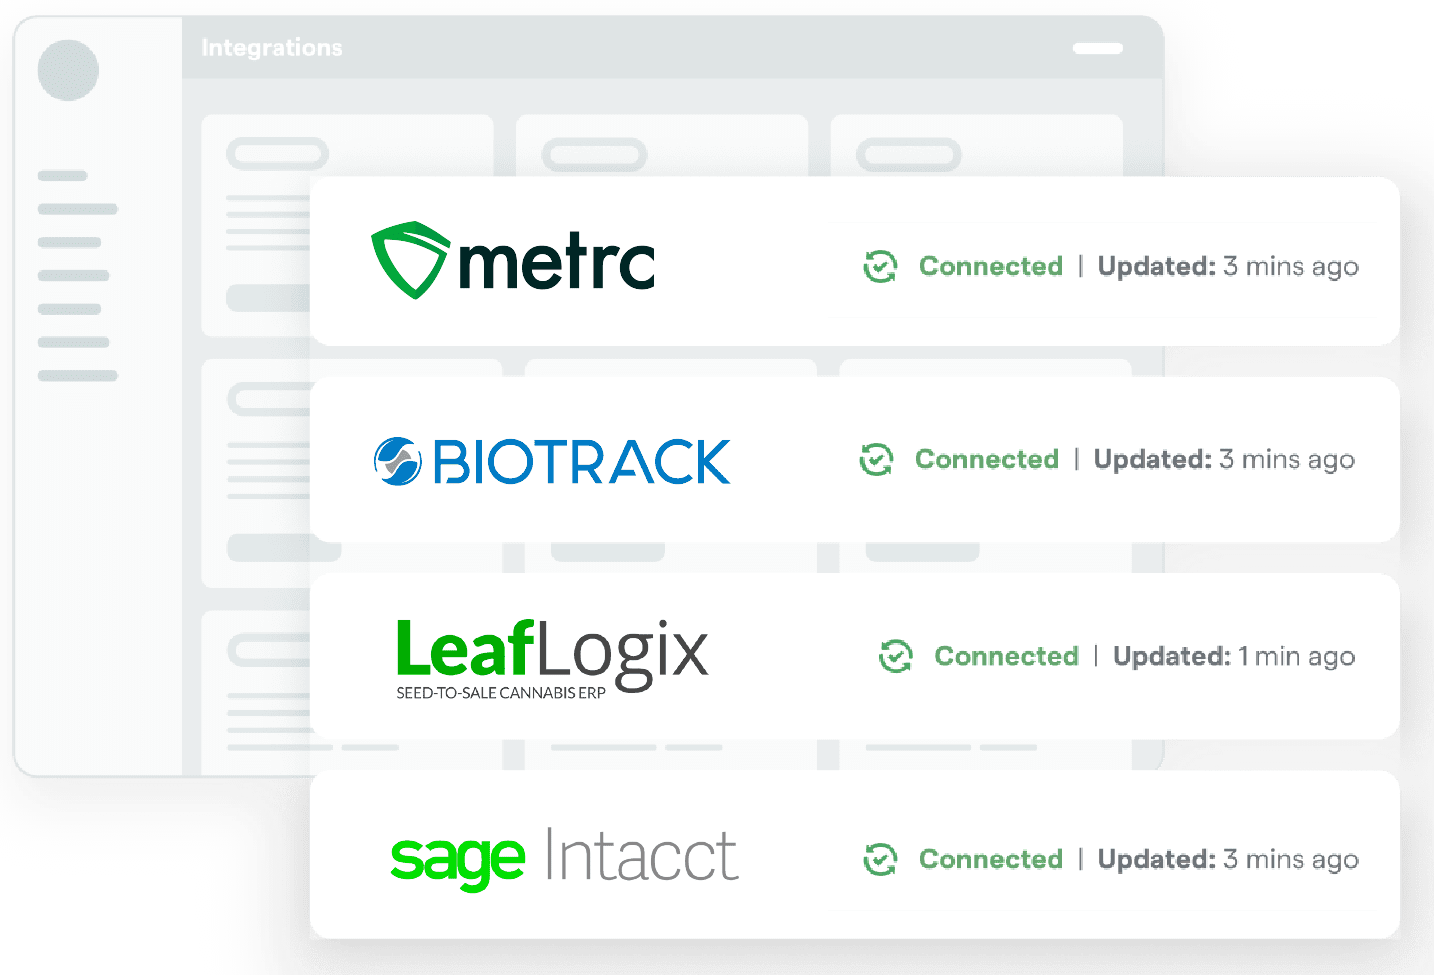 METRC BioTrack LeafLogix and Sage Intacact logos shown to represent the integrations Leaf Trade offers on it's cannabis wholesale marketplace